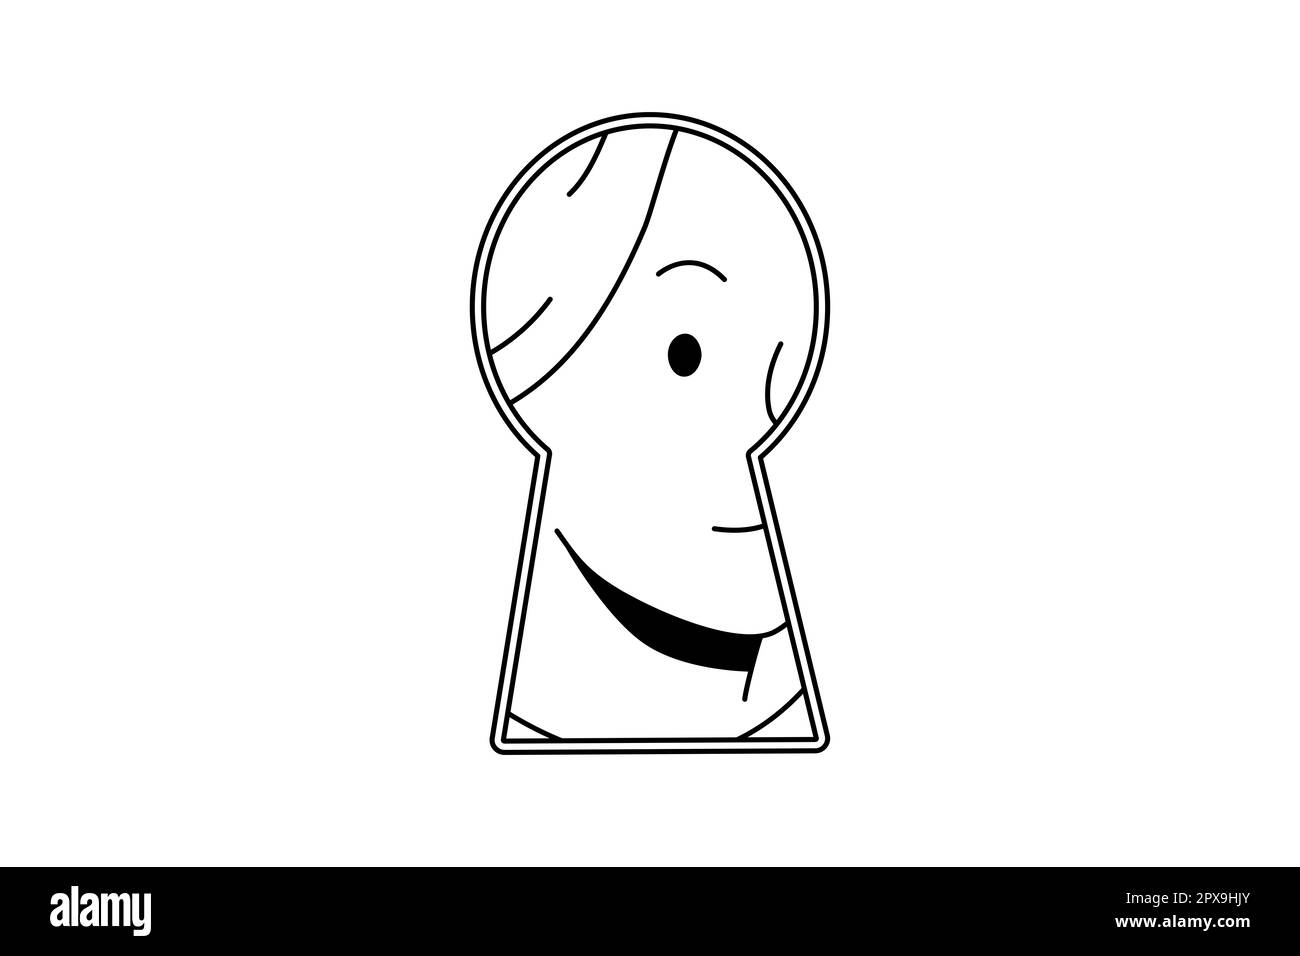 Woman peep in keyhole looking for secret or hidden information. Curious suspicious female interested in secrecy or gossips. Vector illustration. Stock Photo